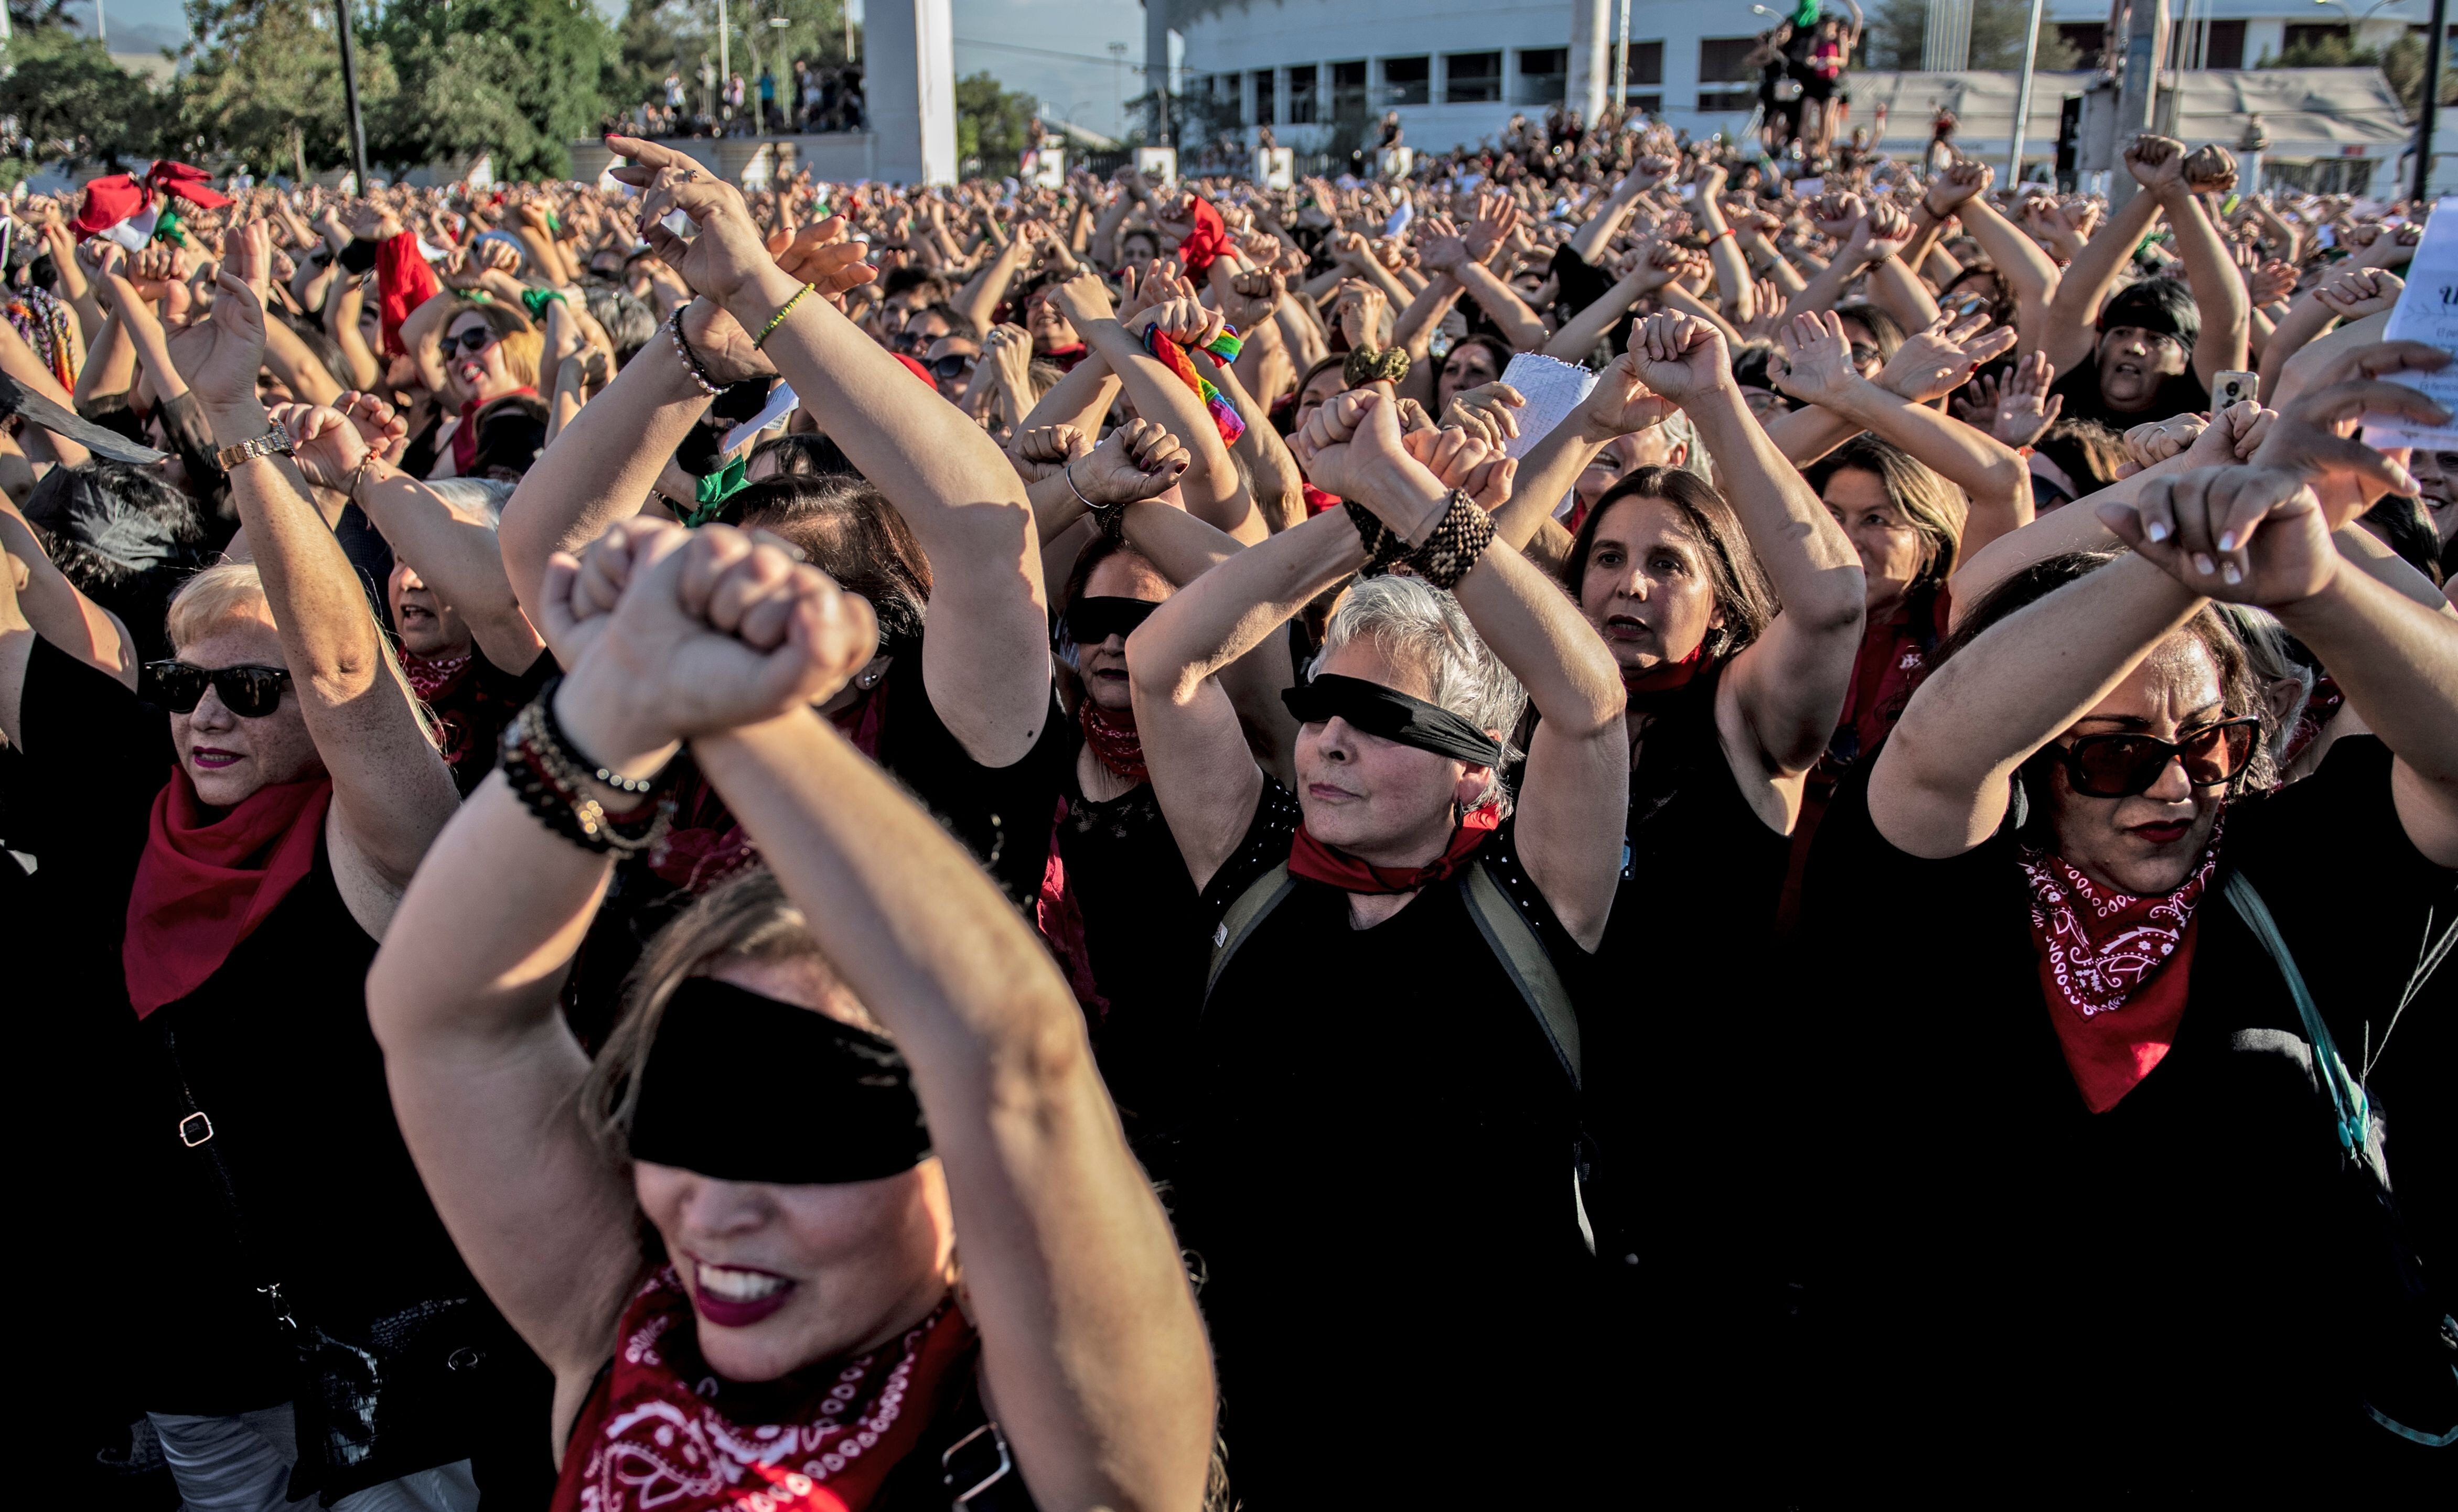 Thousands of women’s rights activists take part in a choreographed performance of the feminist song, “The rapist is you”, in Santiago, Chile on December 04, 2019. Photo: AFP via Getty Images